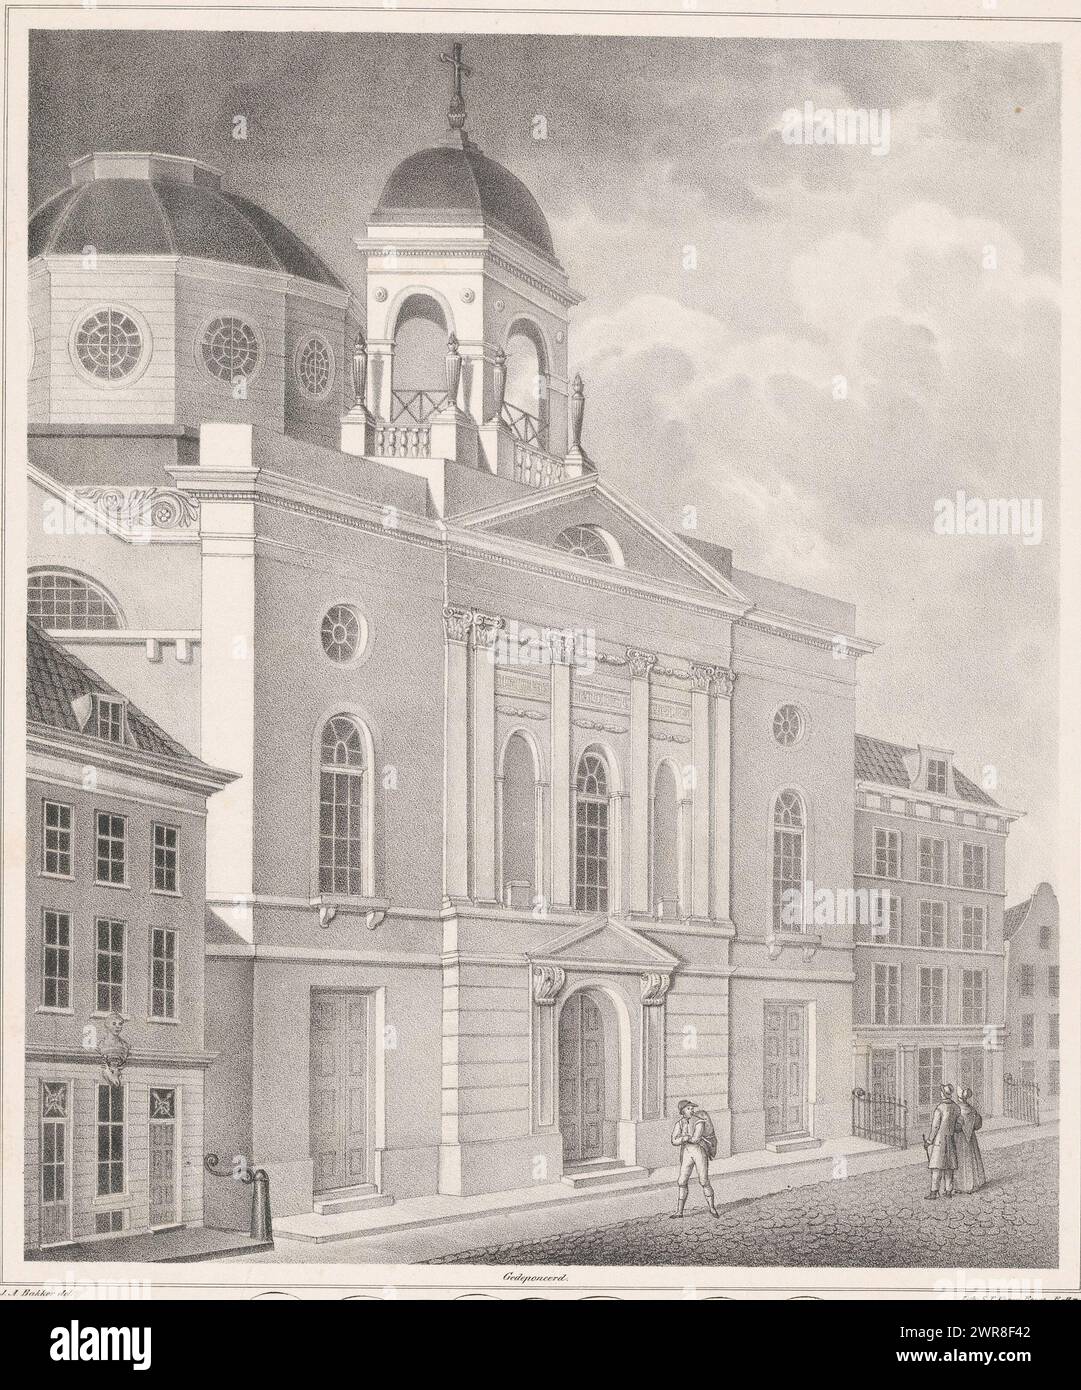 Church of Saint Dominic on the Steiger on the Hoogstraat in Rotterdam, Image of the Roman Catholic Church of the Congregation of van den Steiger Rotterdam (title on object), Three figures are walking on the street in front of the church., print maker: Job Augustus Bakker, printer: Sebastiaan Theodorus Voorn Boers, publisher: J.A. van Belle, Rotterdam, 1835, paper, height 550 mm × width 440 mm, print Stock Photo